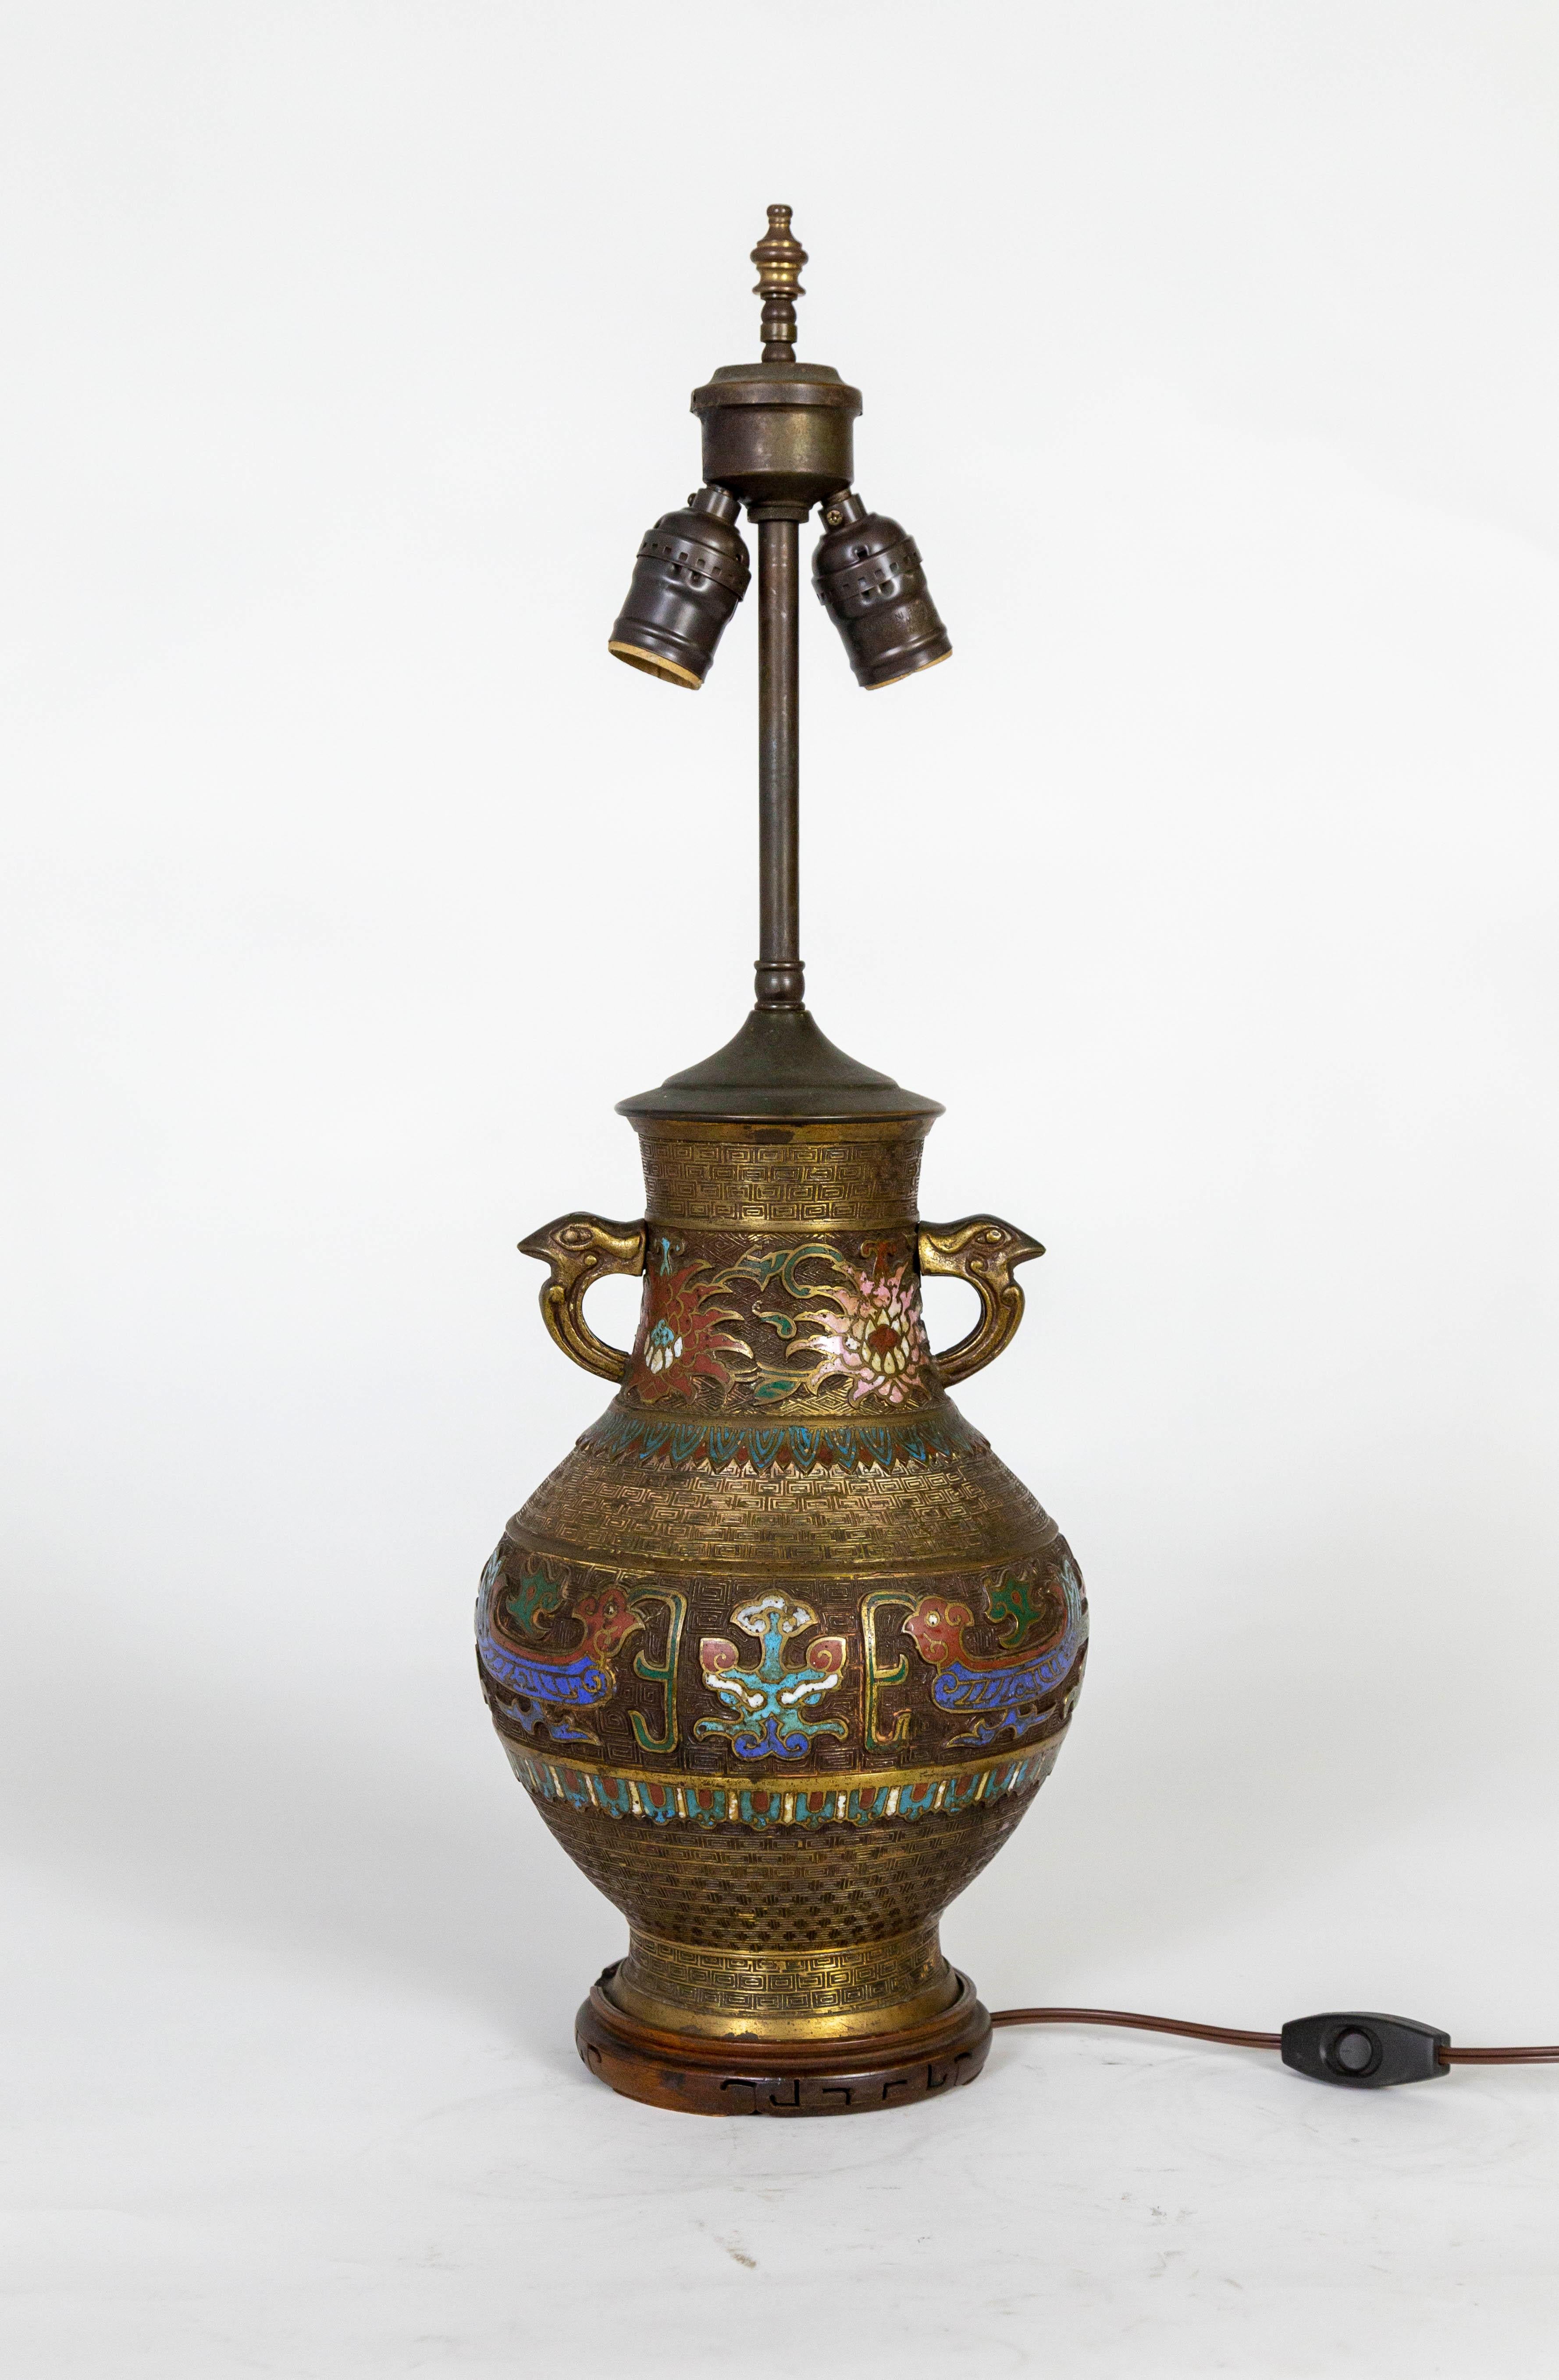 An early 20th century, patinated, cast bronze and champleve enamel vase that has been converted into a lamp; in an urn shape with an intricate greek key motif and handles cast with bird faces. Champleve is a technique that creates recesses in metal